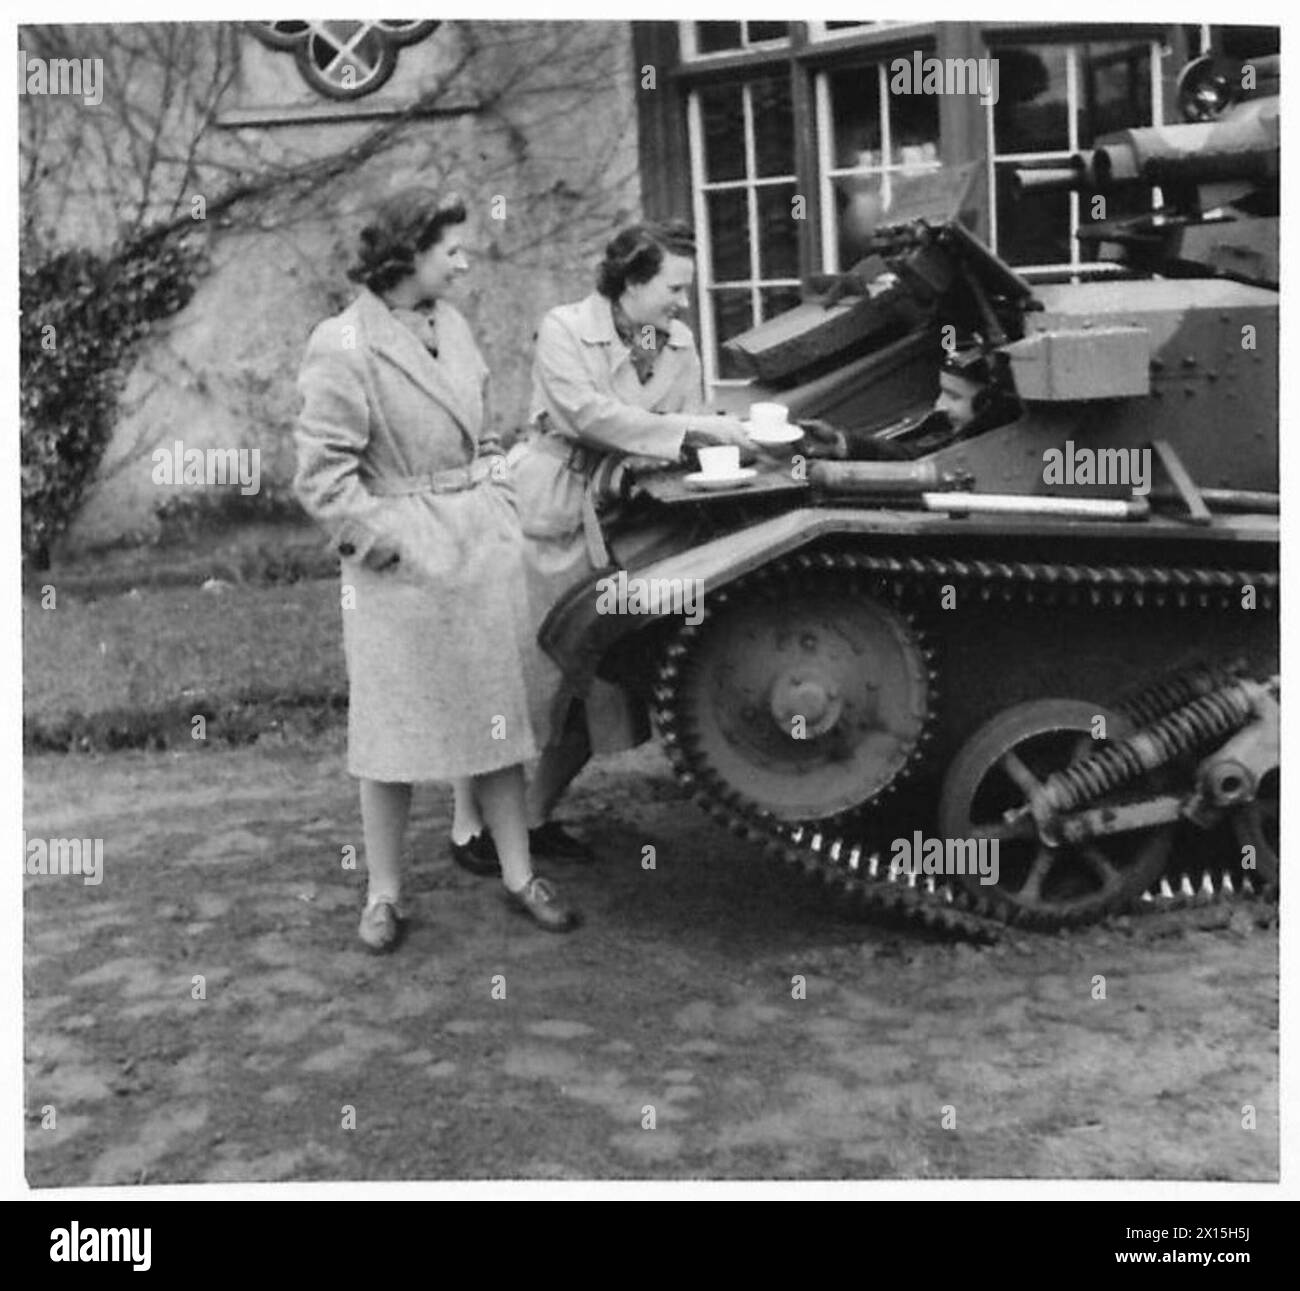 A WELCOME CUP O' TAY - Irish colleens giving a cup of tea to the crew of a light tank somewhere in Northern Ireland. The thatched house in the background is Deramore House, Bessbrook Co.Armagh, built in 1760. It was here that Isaac Corry, who built it, and Lord Castlereagh had their famous consultation and drafted the Act of Union, which was also signed in the House British Army Stock Photo